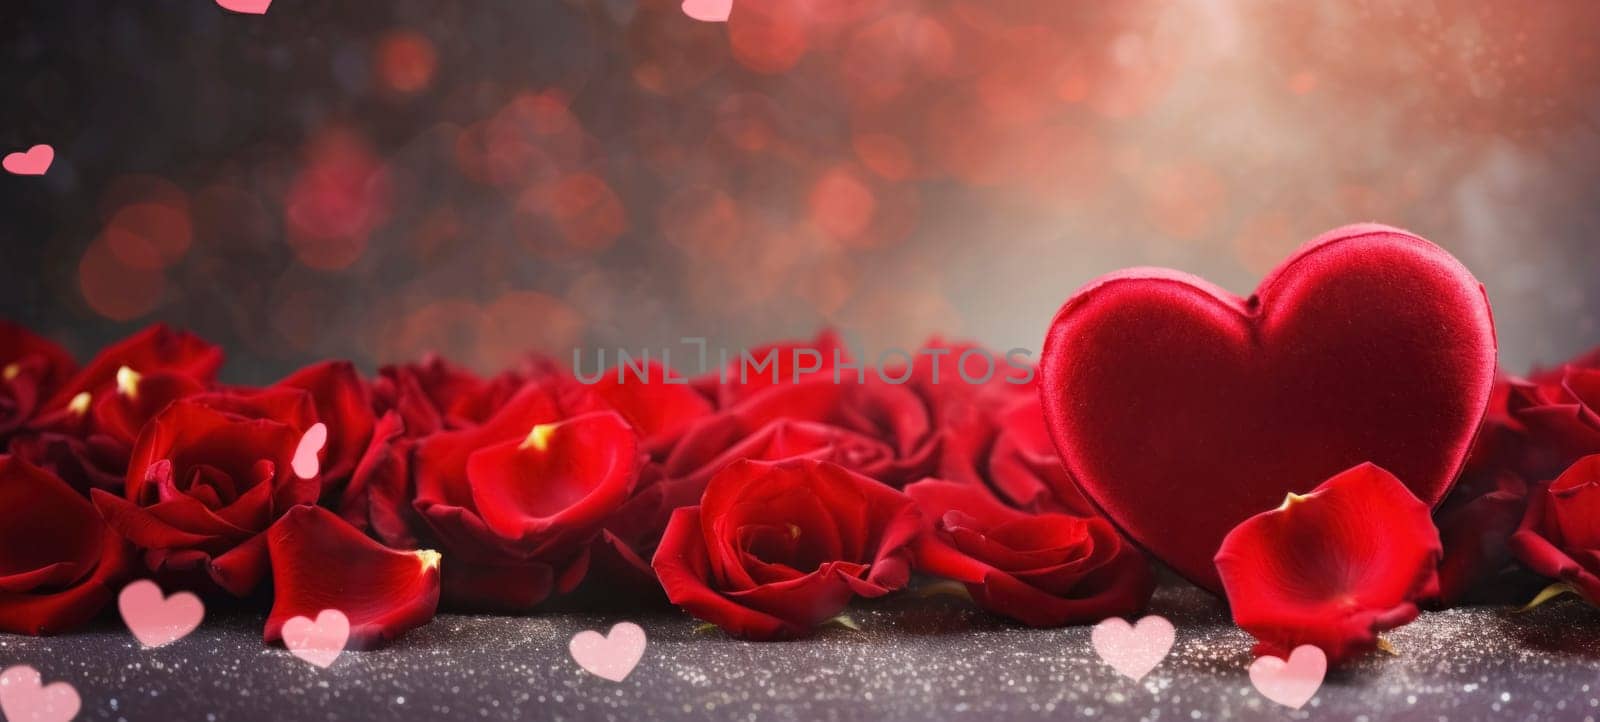 Background with roses and hearts for Valentine's Day. Horizontal banner or greeting card